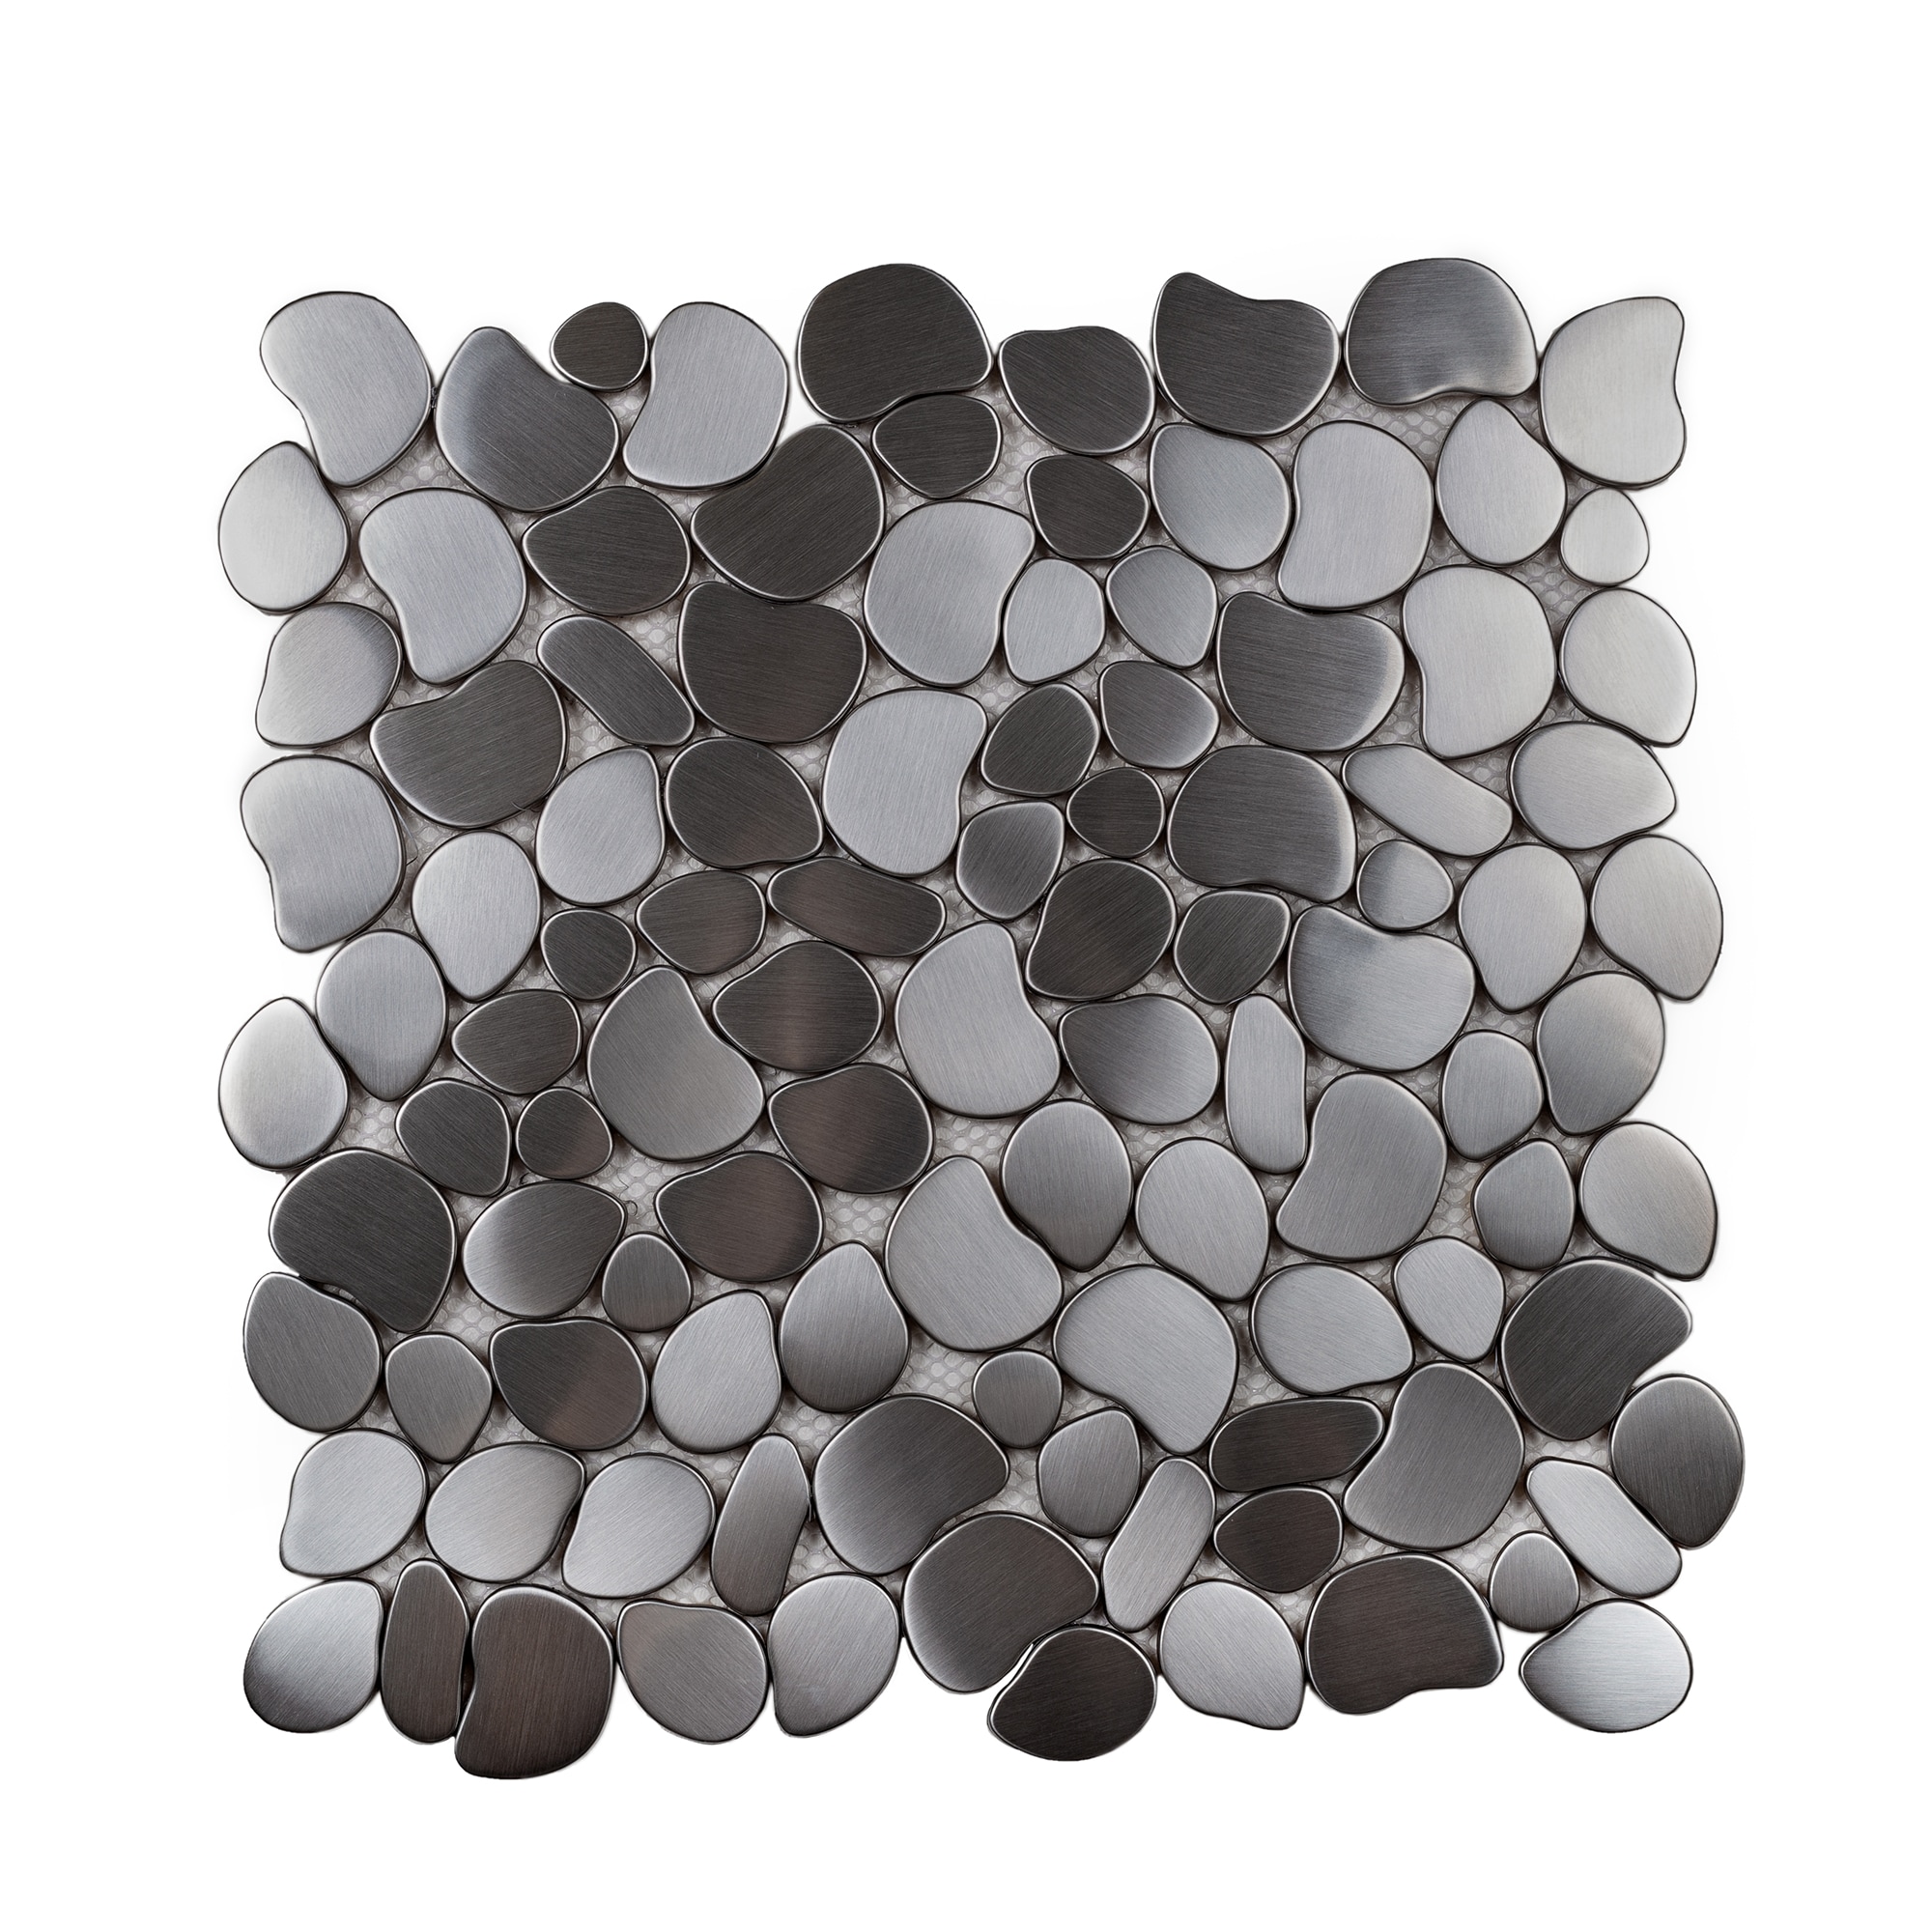 4 x 4 Stainless Steel Tile - Stainless Steel Tile